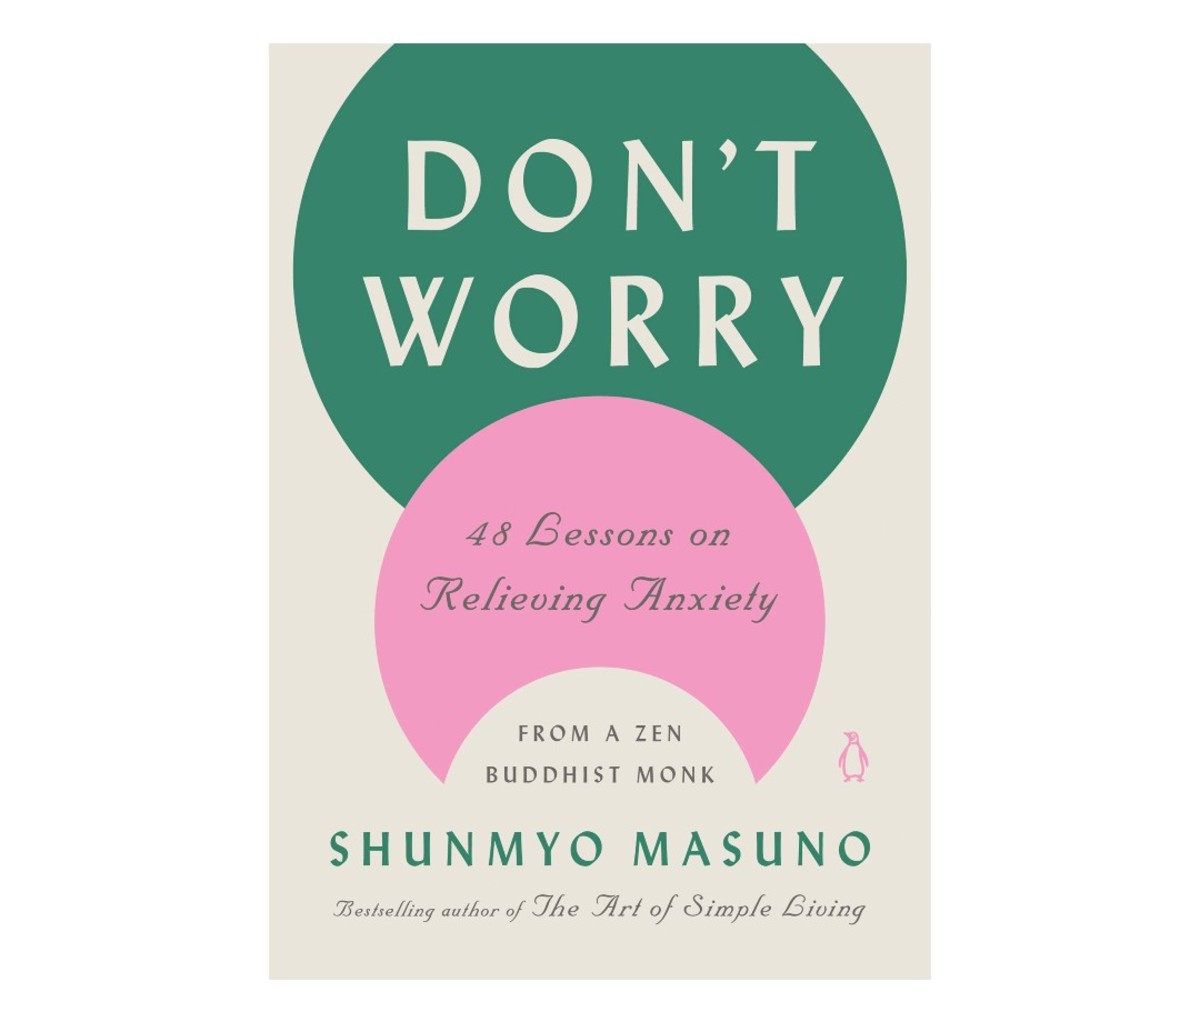 WORRY NOT: 48 Lessons to Relieve Anxiety from a Zen Buddhist Monk by Shunmyo Masuno